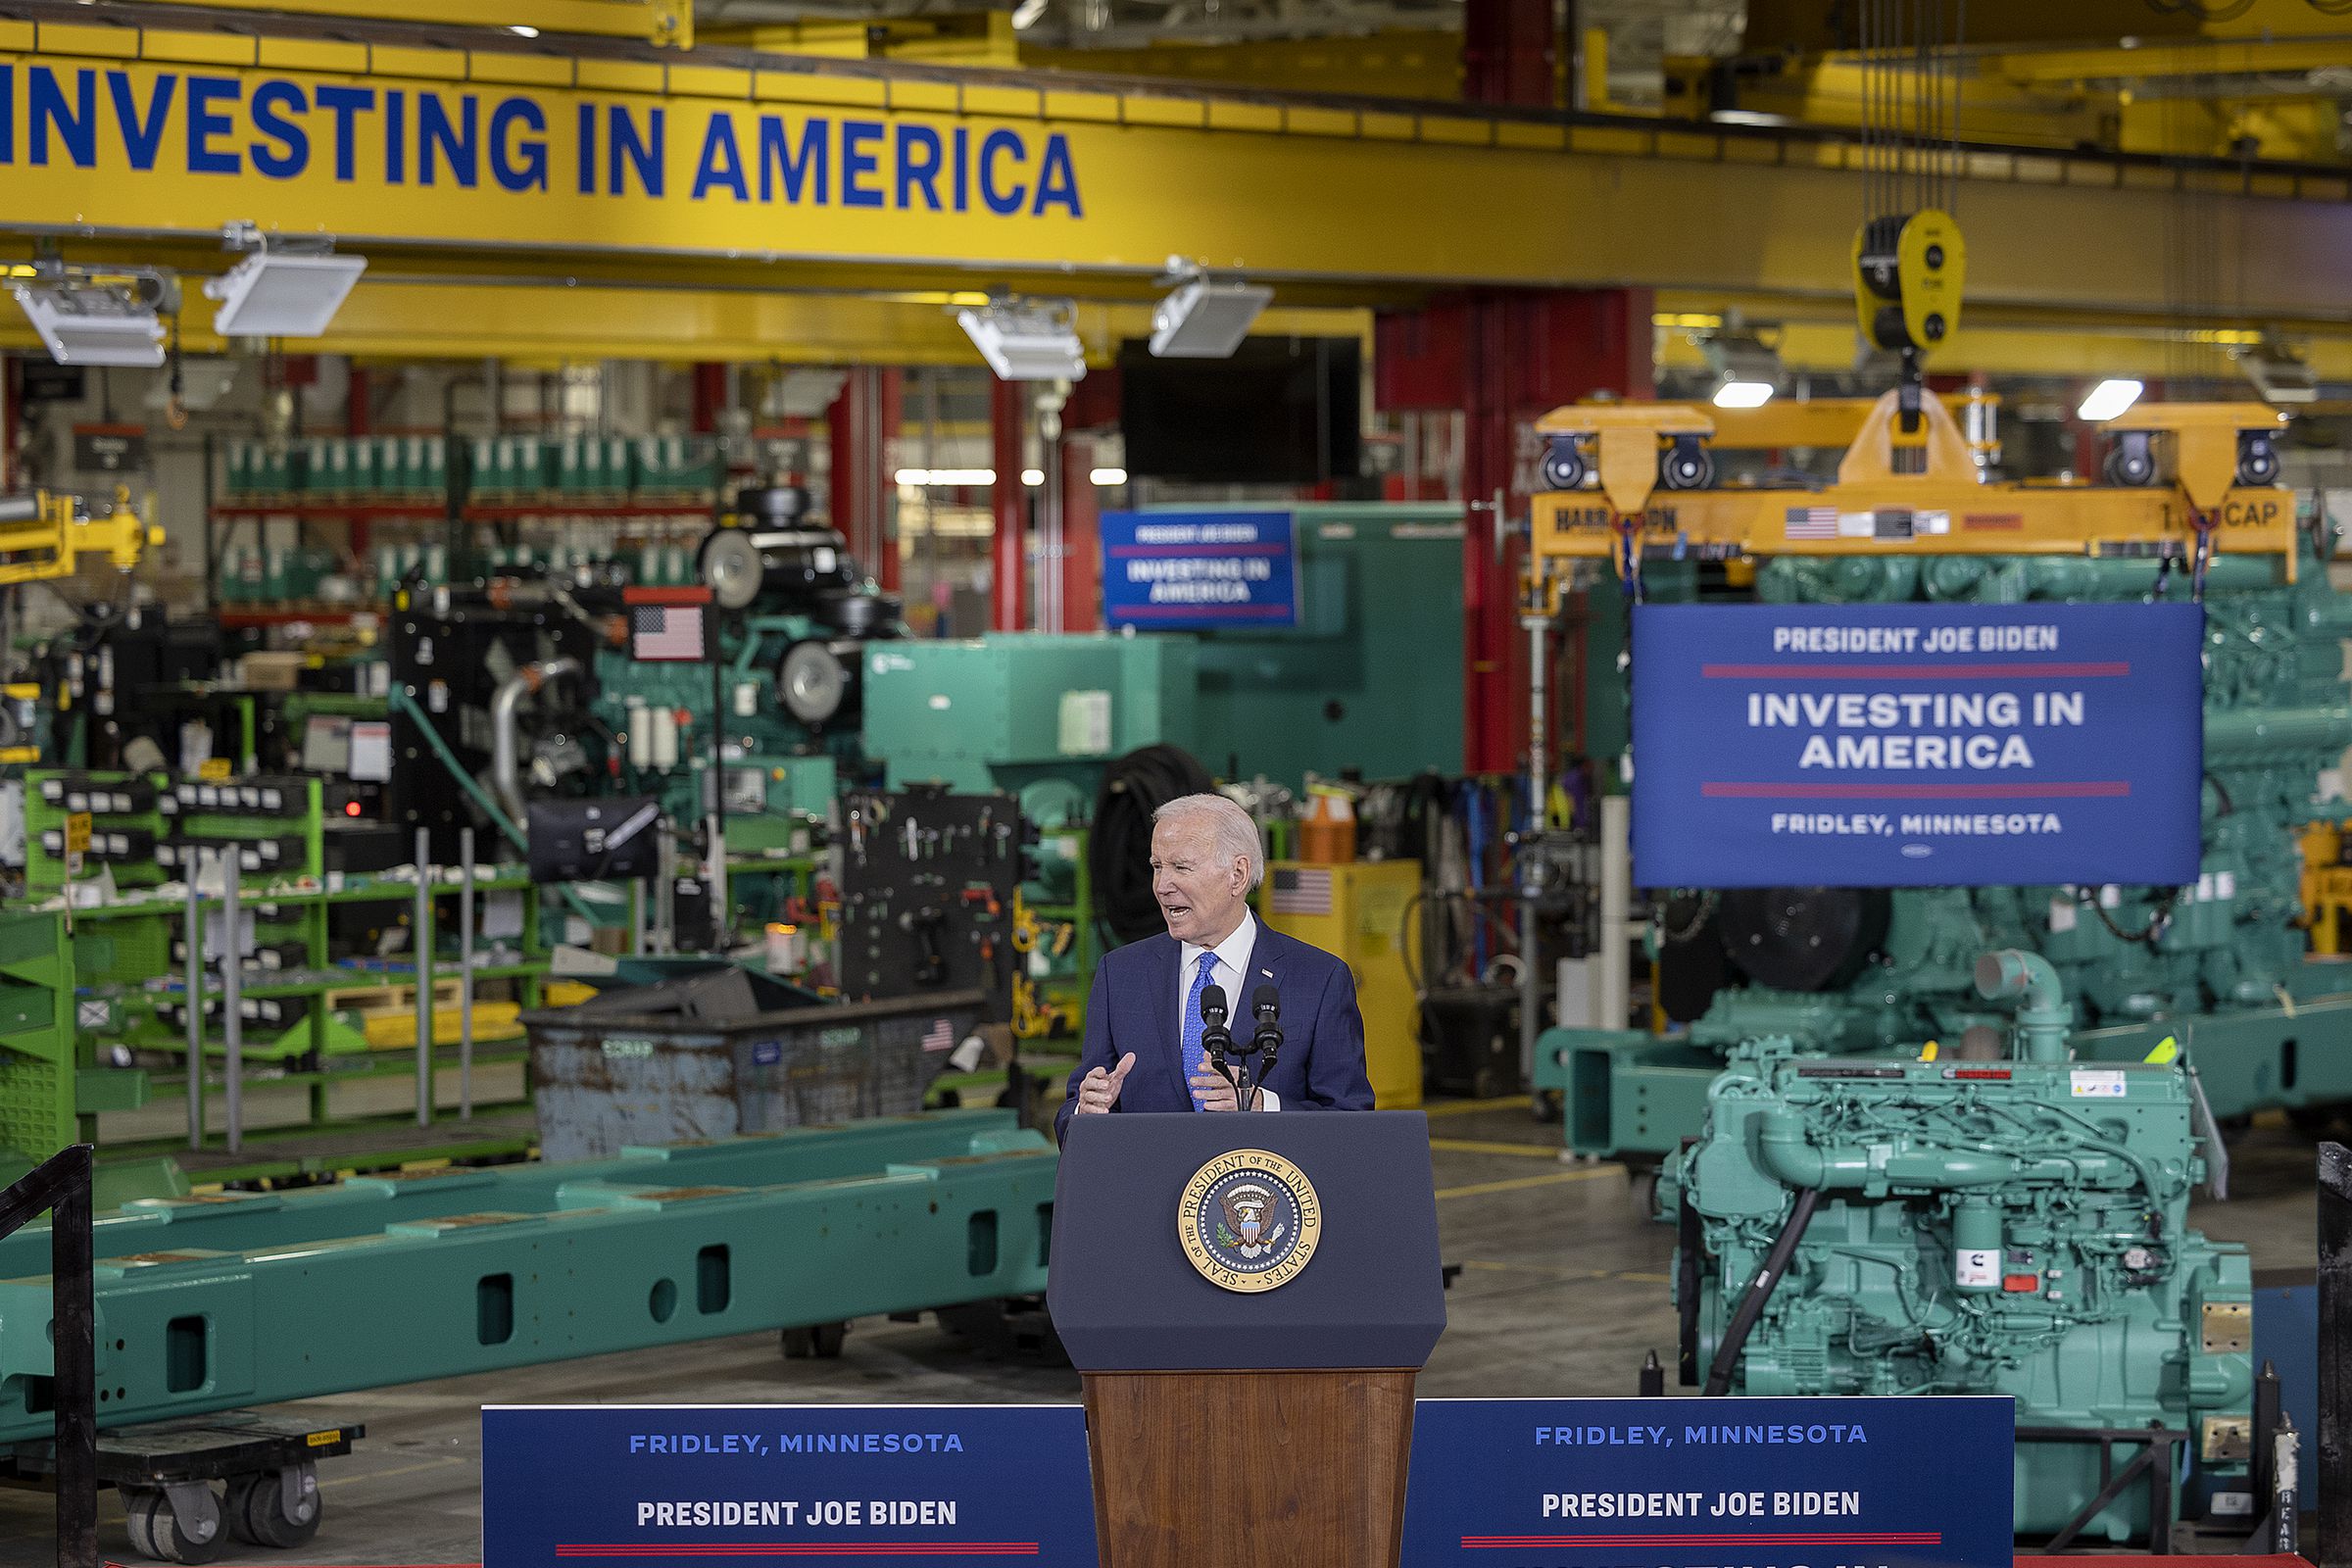 Joe Biden stands at a podium inside an industrial facility. Several signs around him say “Investing in America.”